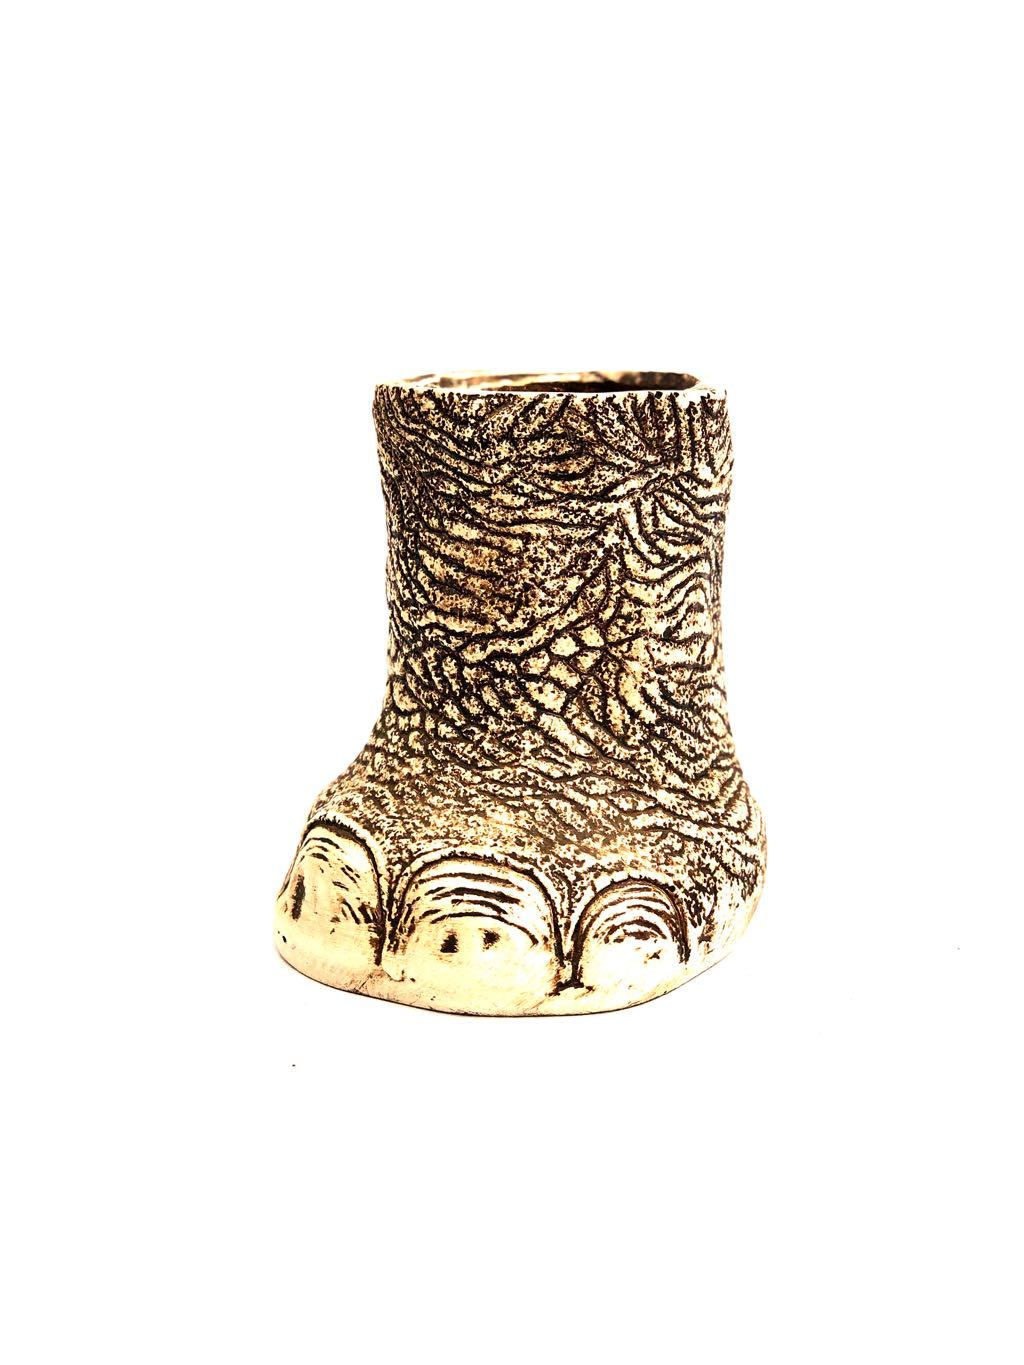 Elephant Foot Resin Pen Stand Multi Purpose Stand Home Utility Tamrapatra